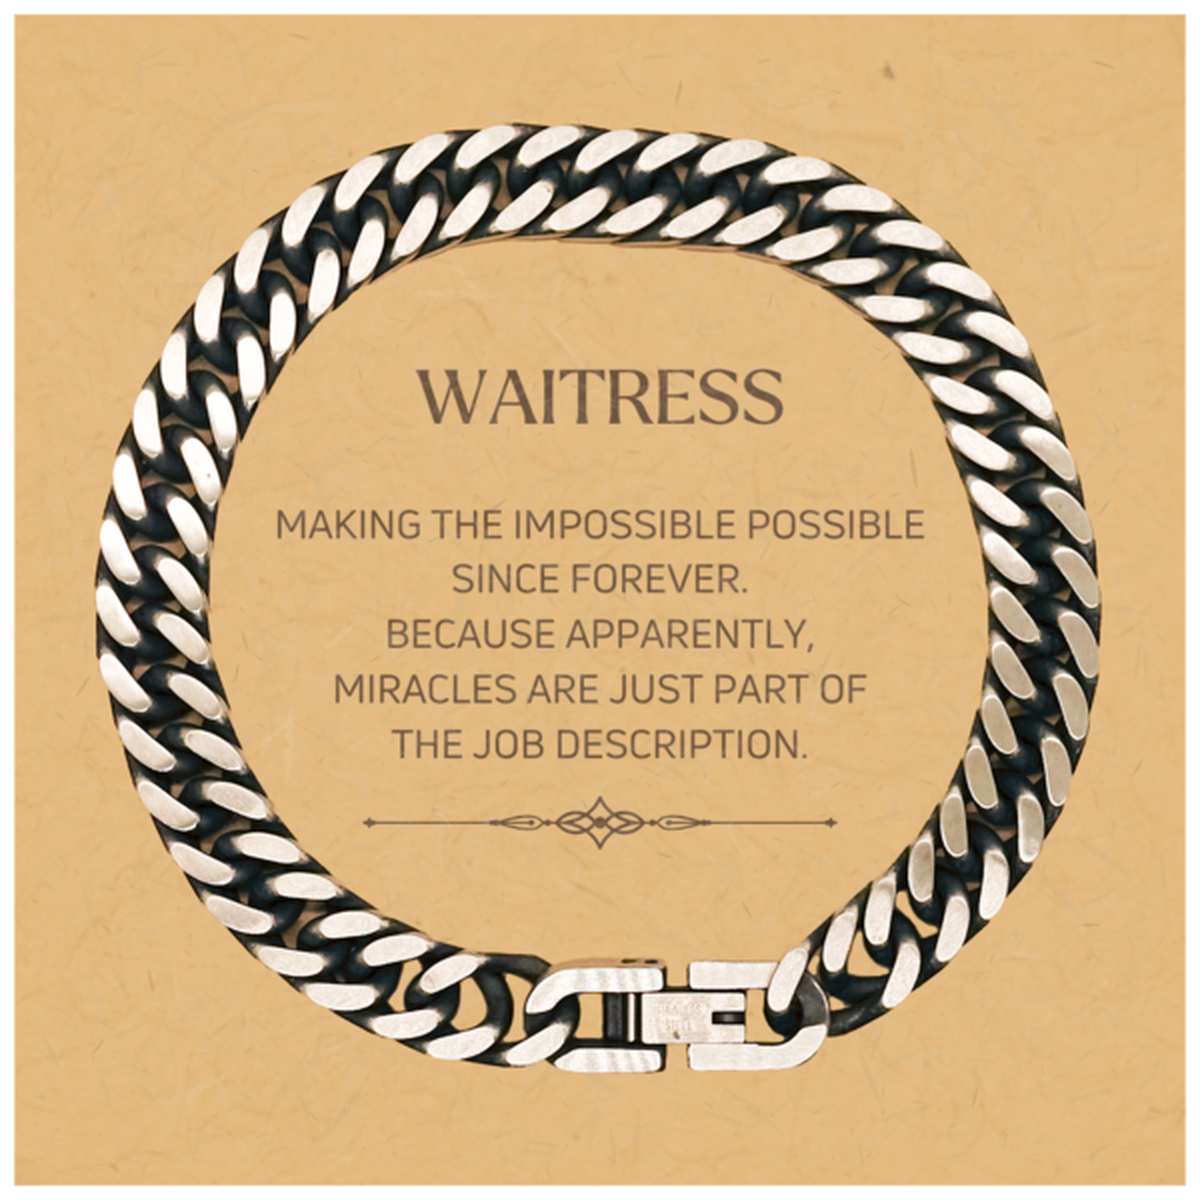 Funny Waitress Gifts, Miracles are just part of the job description, Inspirational Birthday Christmas Cuban Link Chain Bracelet For Waitress, Men, Women, Coworkers, Friends, Boss